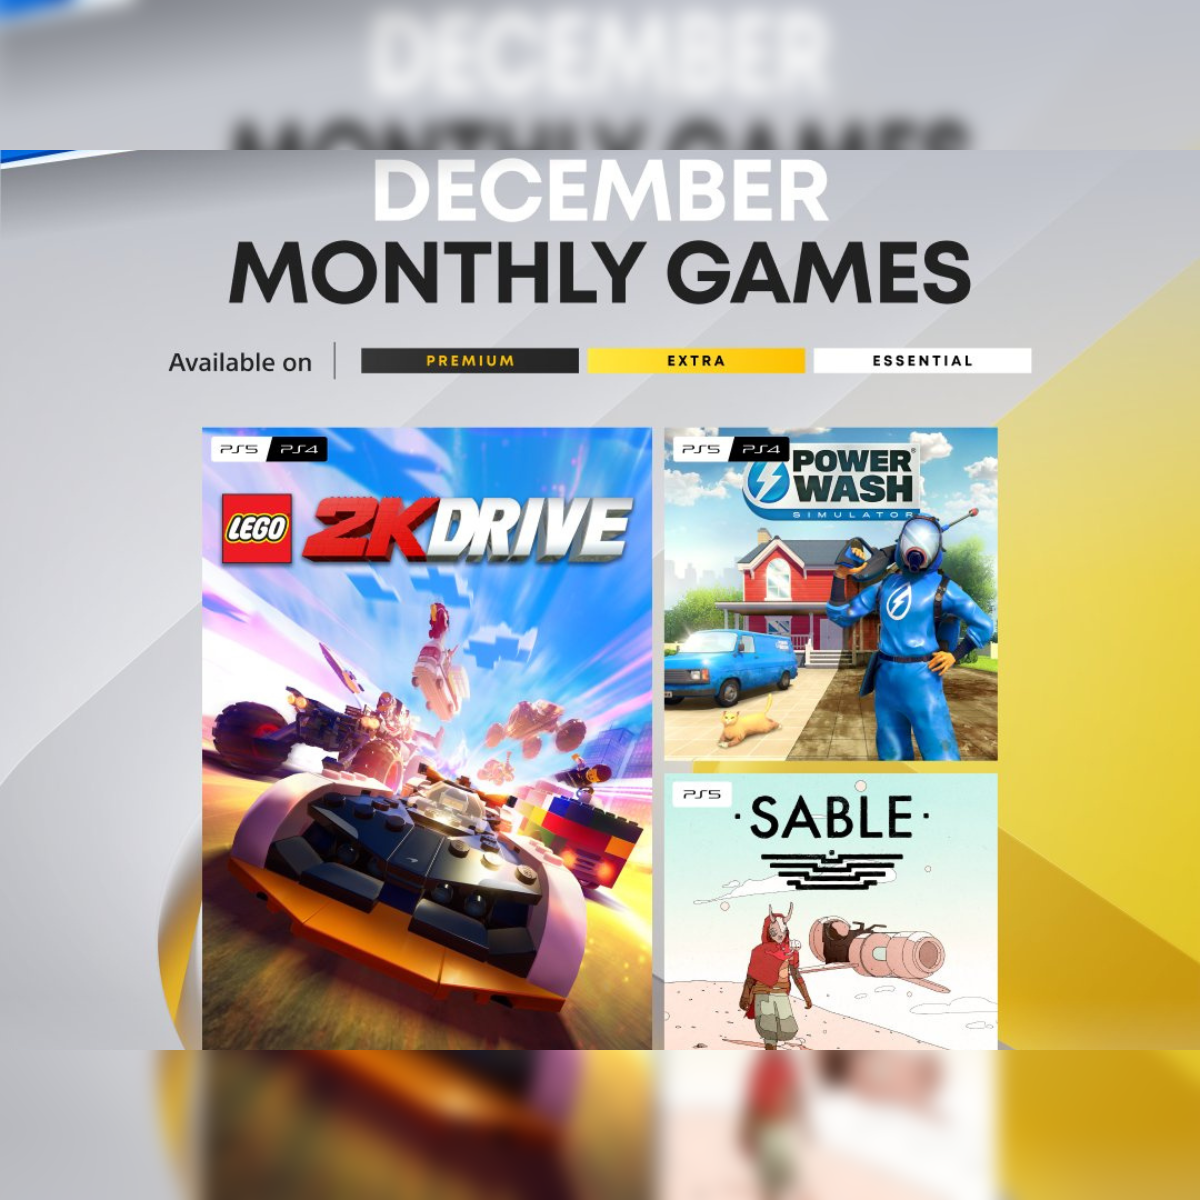 PlayStation Plus: Tech treats! PlayStation announces monthly free